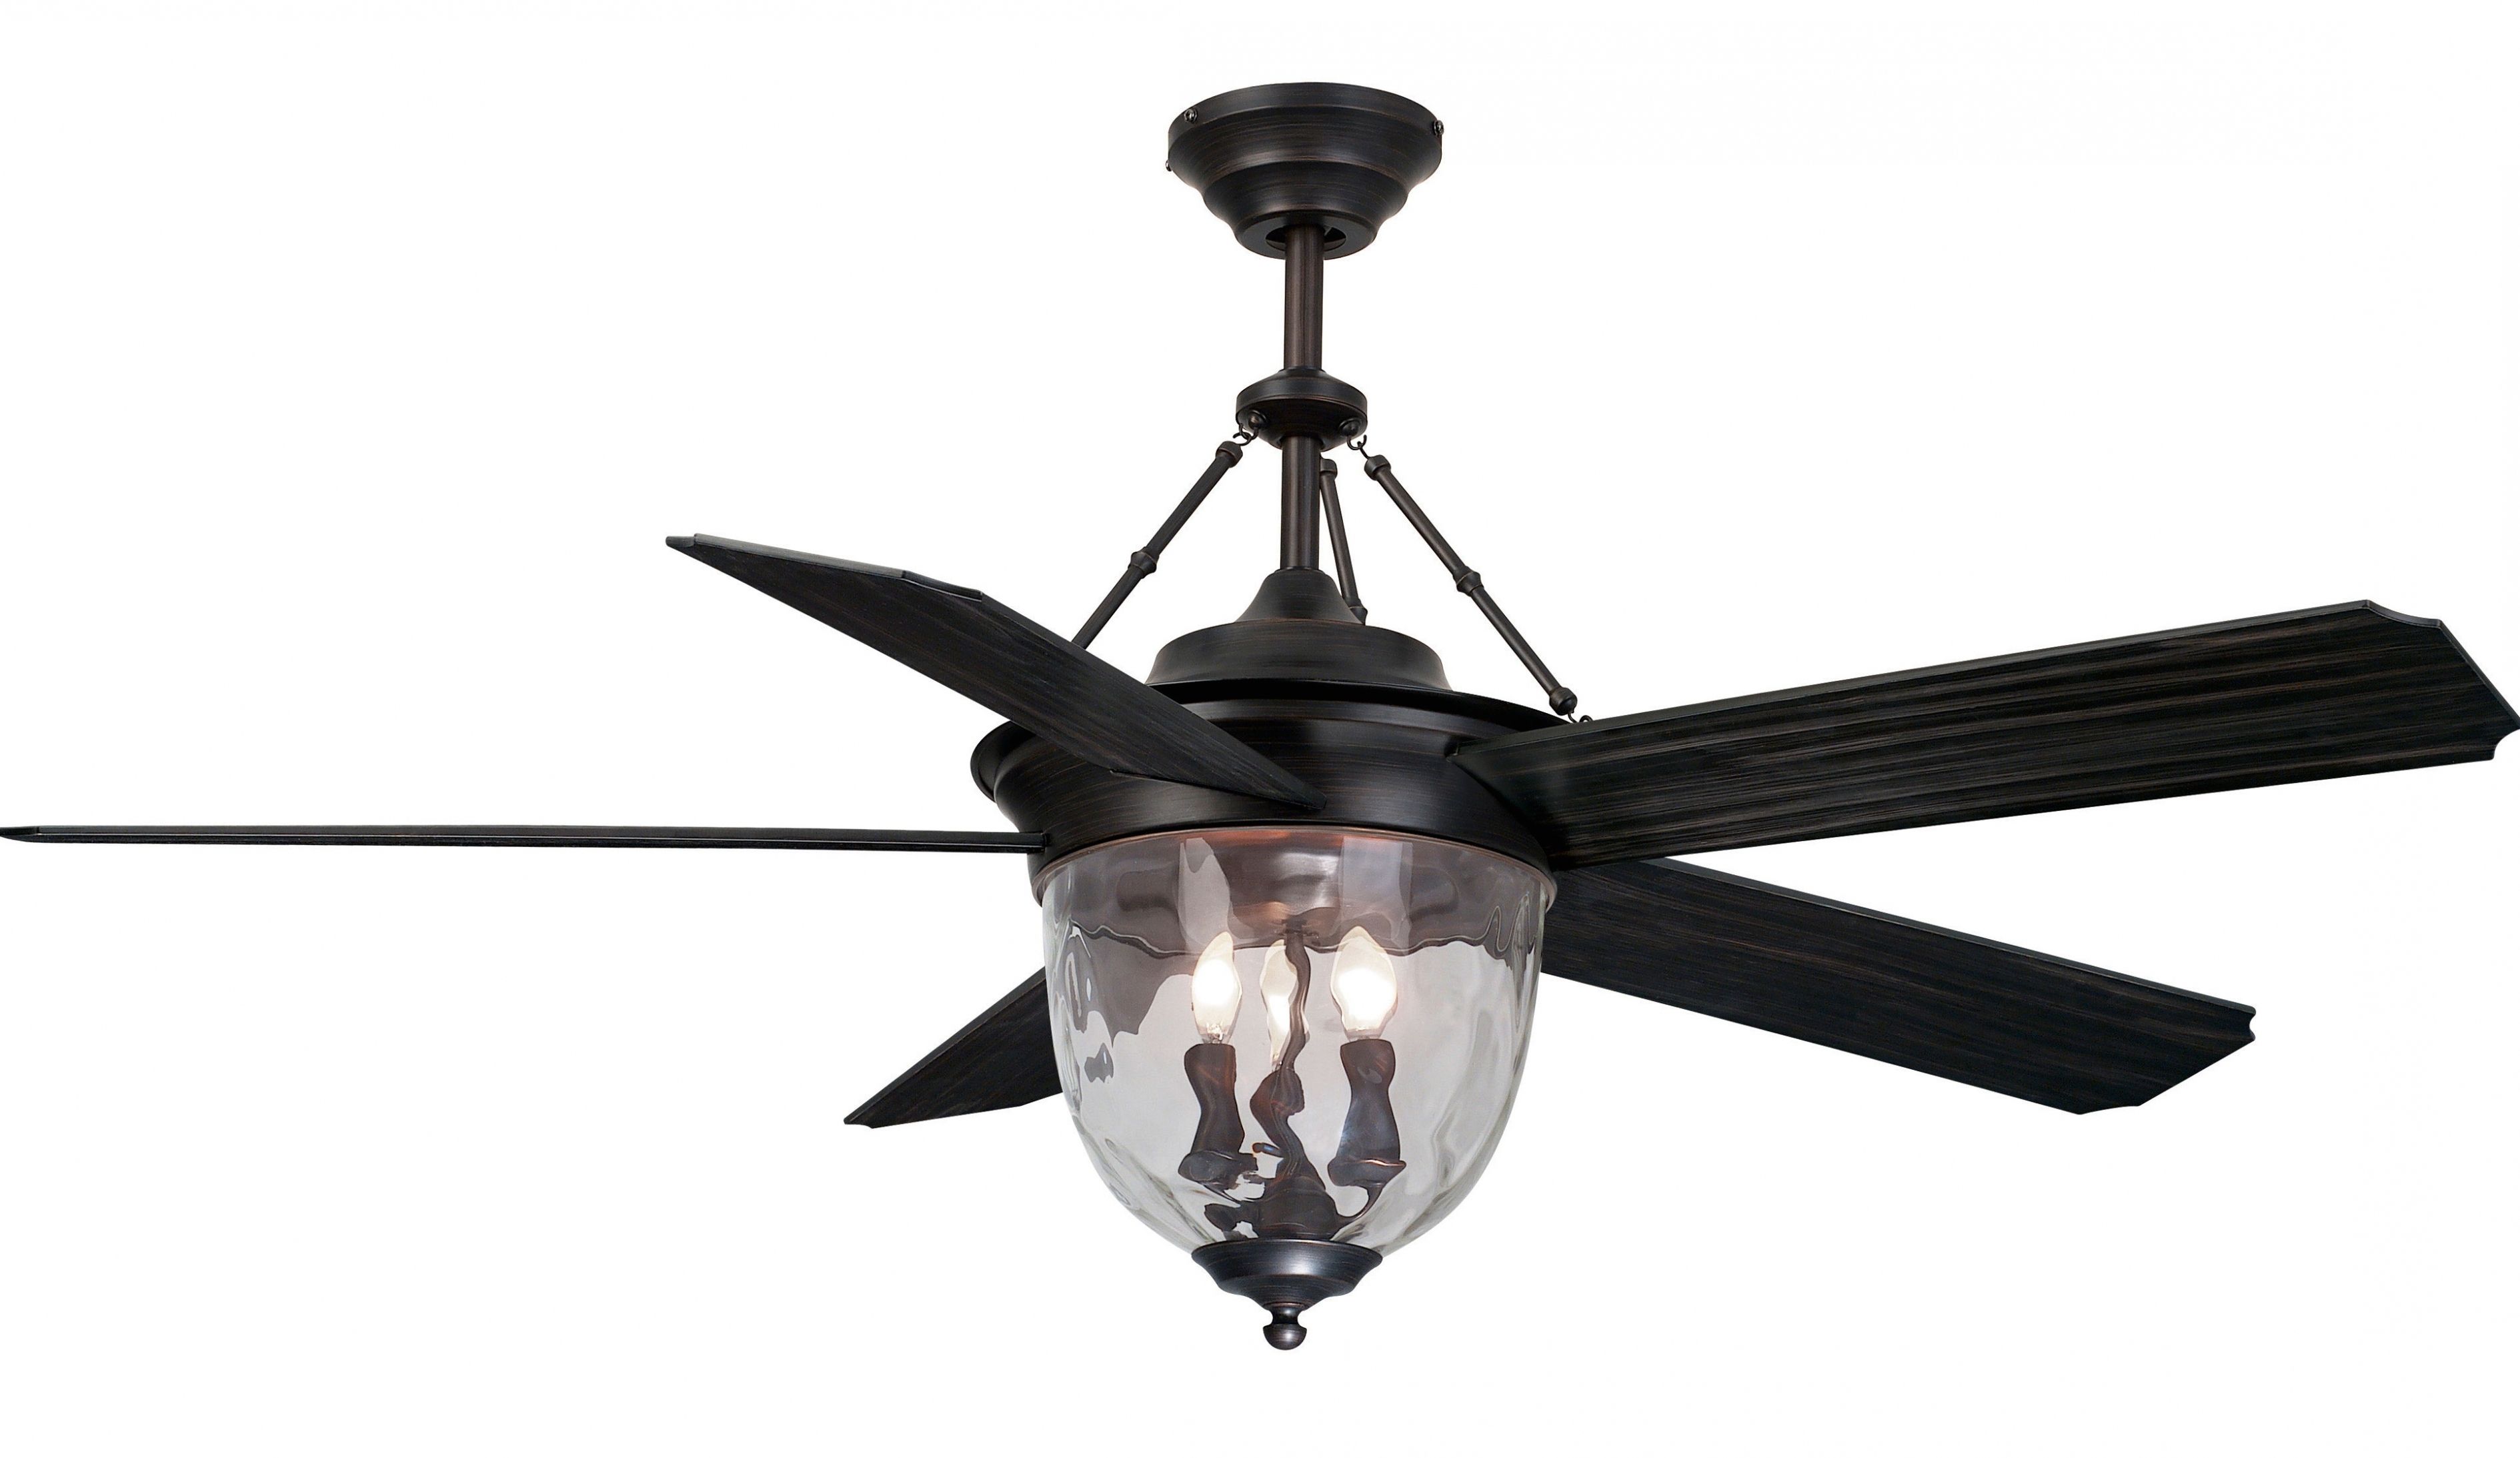 Lighting: Lowes Outdoor Ceiling Fans With Light Home Design Ideas With Regard To Latest Outdoor Ceiling Fans At Lowes (View 7 of 20)